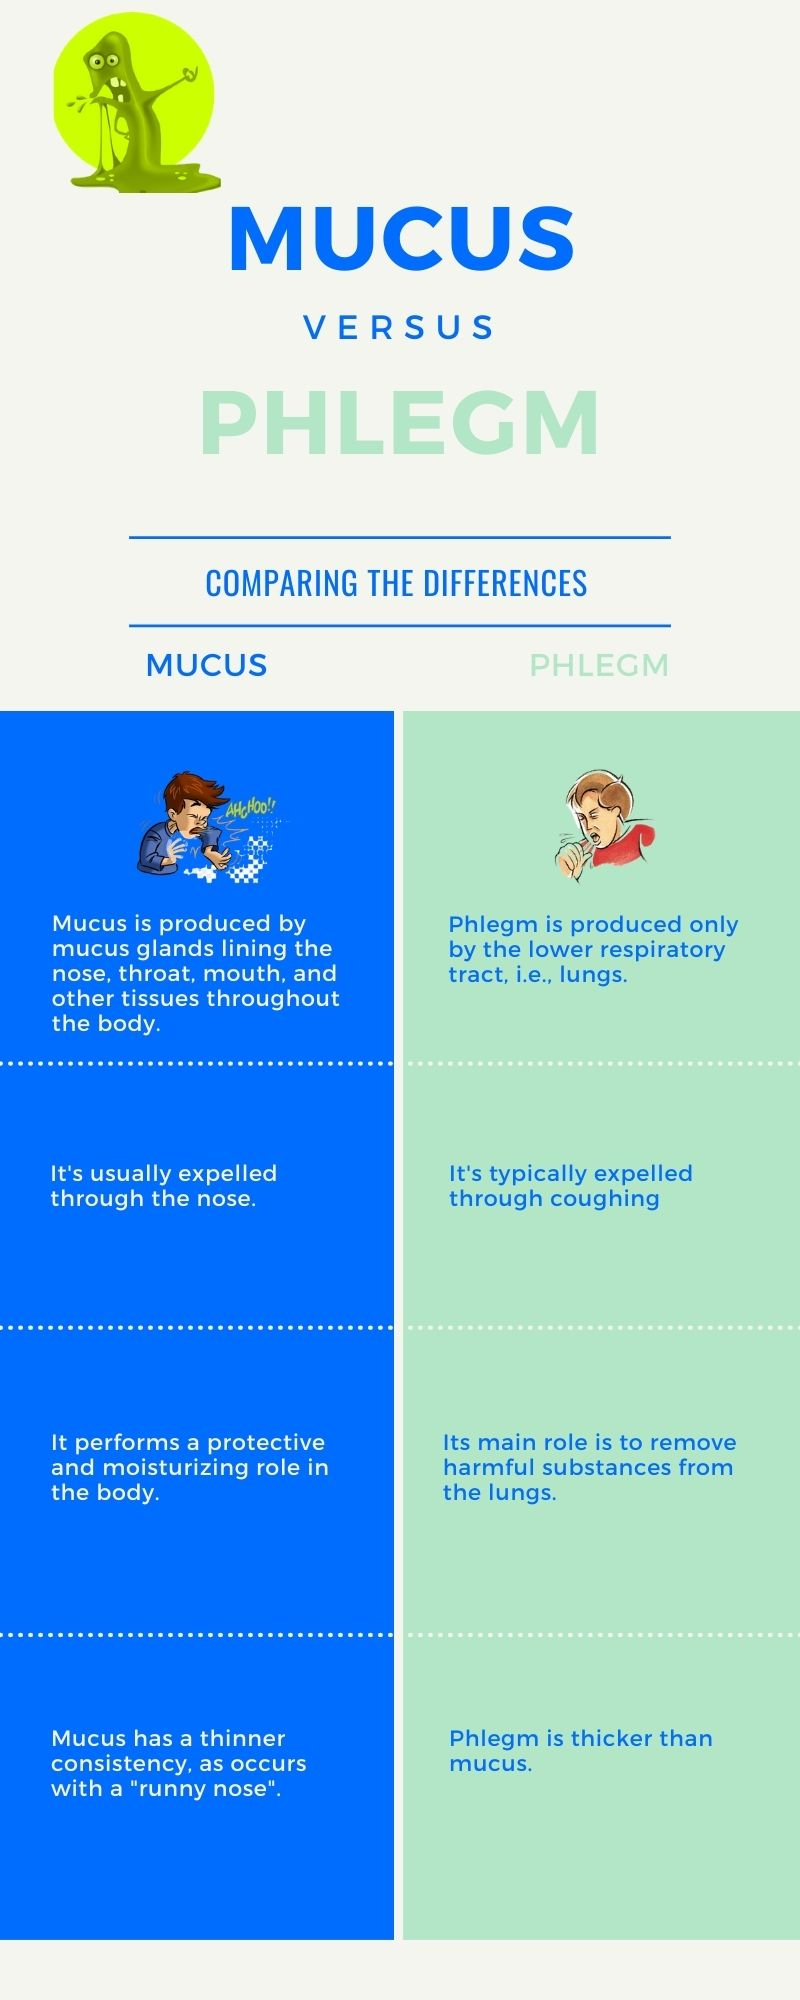 An infographic with cartoon images illustrating the differences between mucus and phlegm with explanatory text described below. 